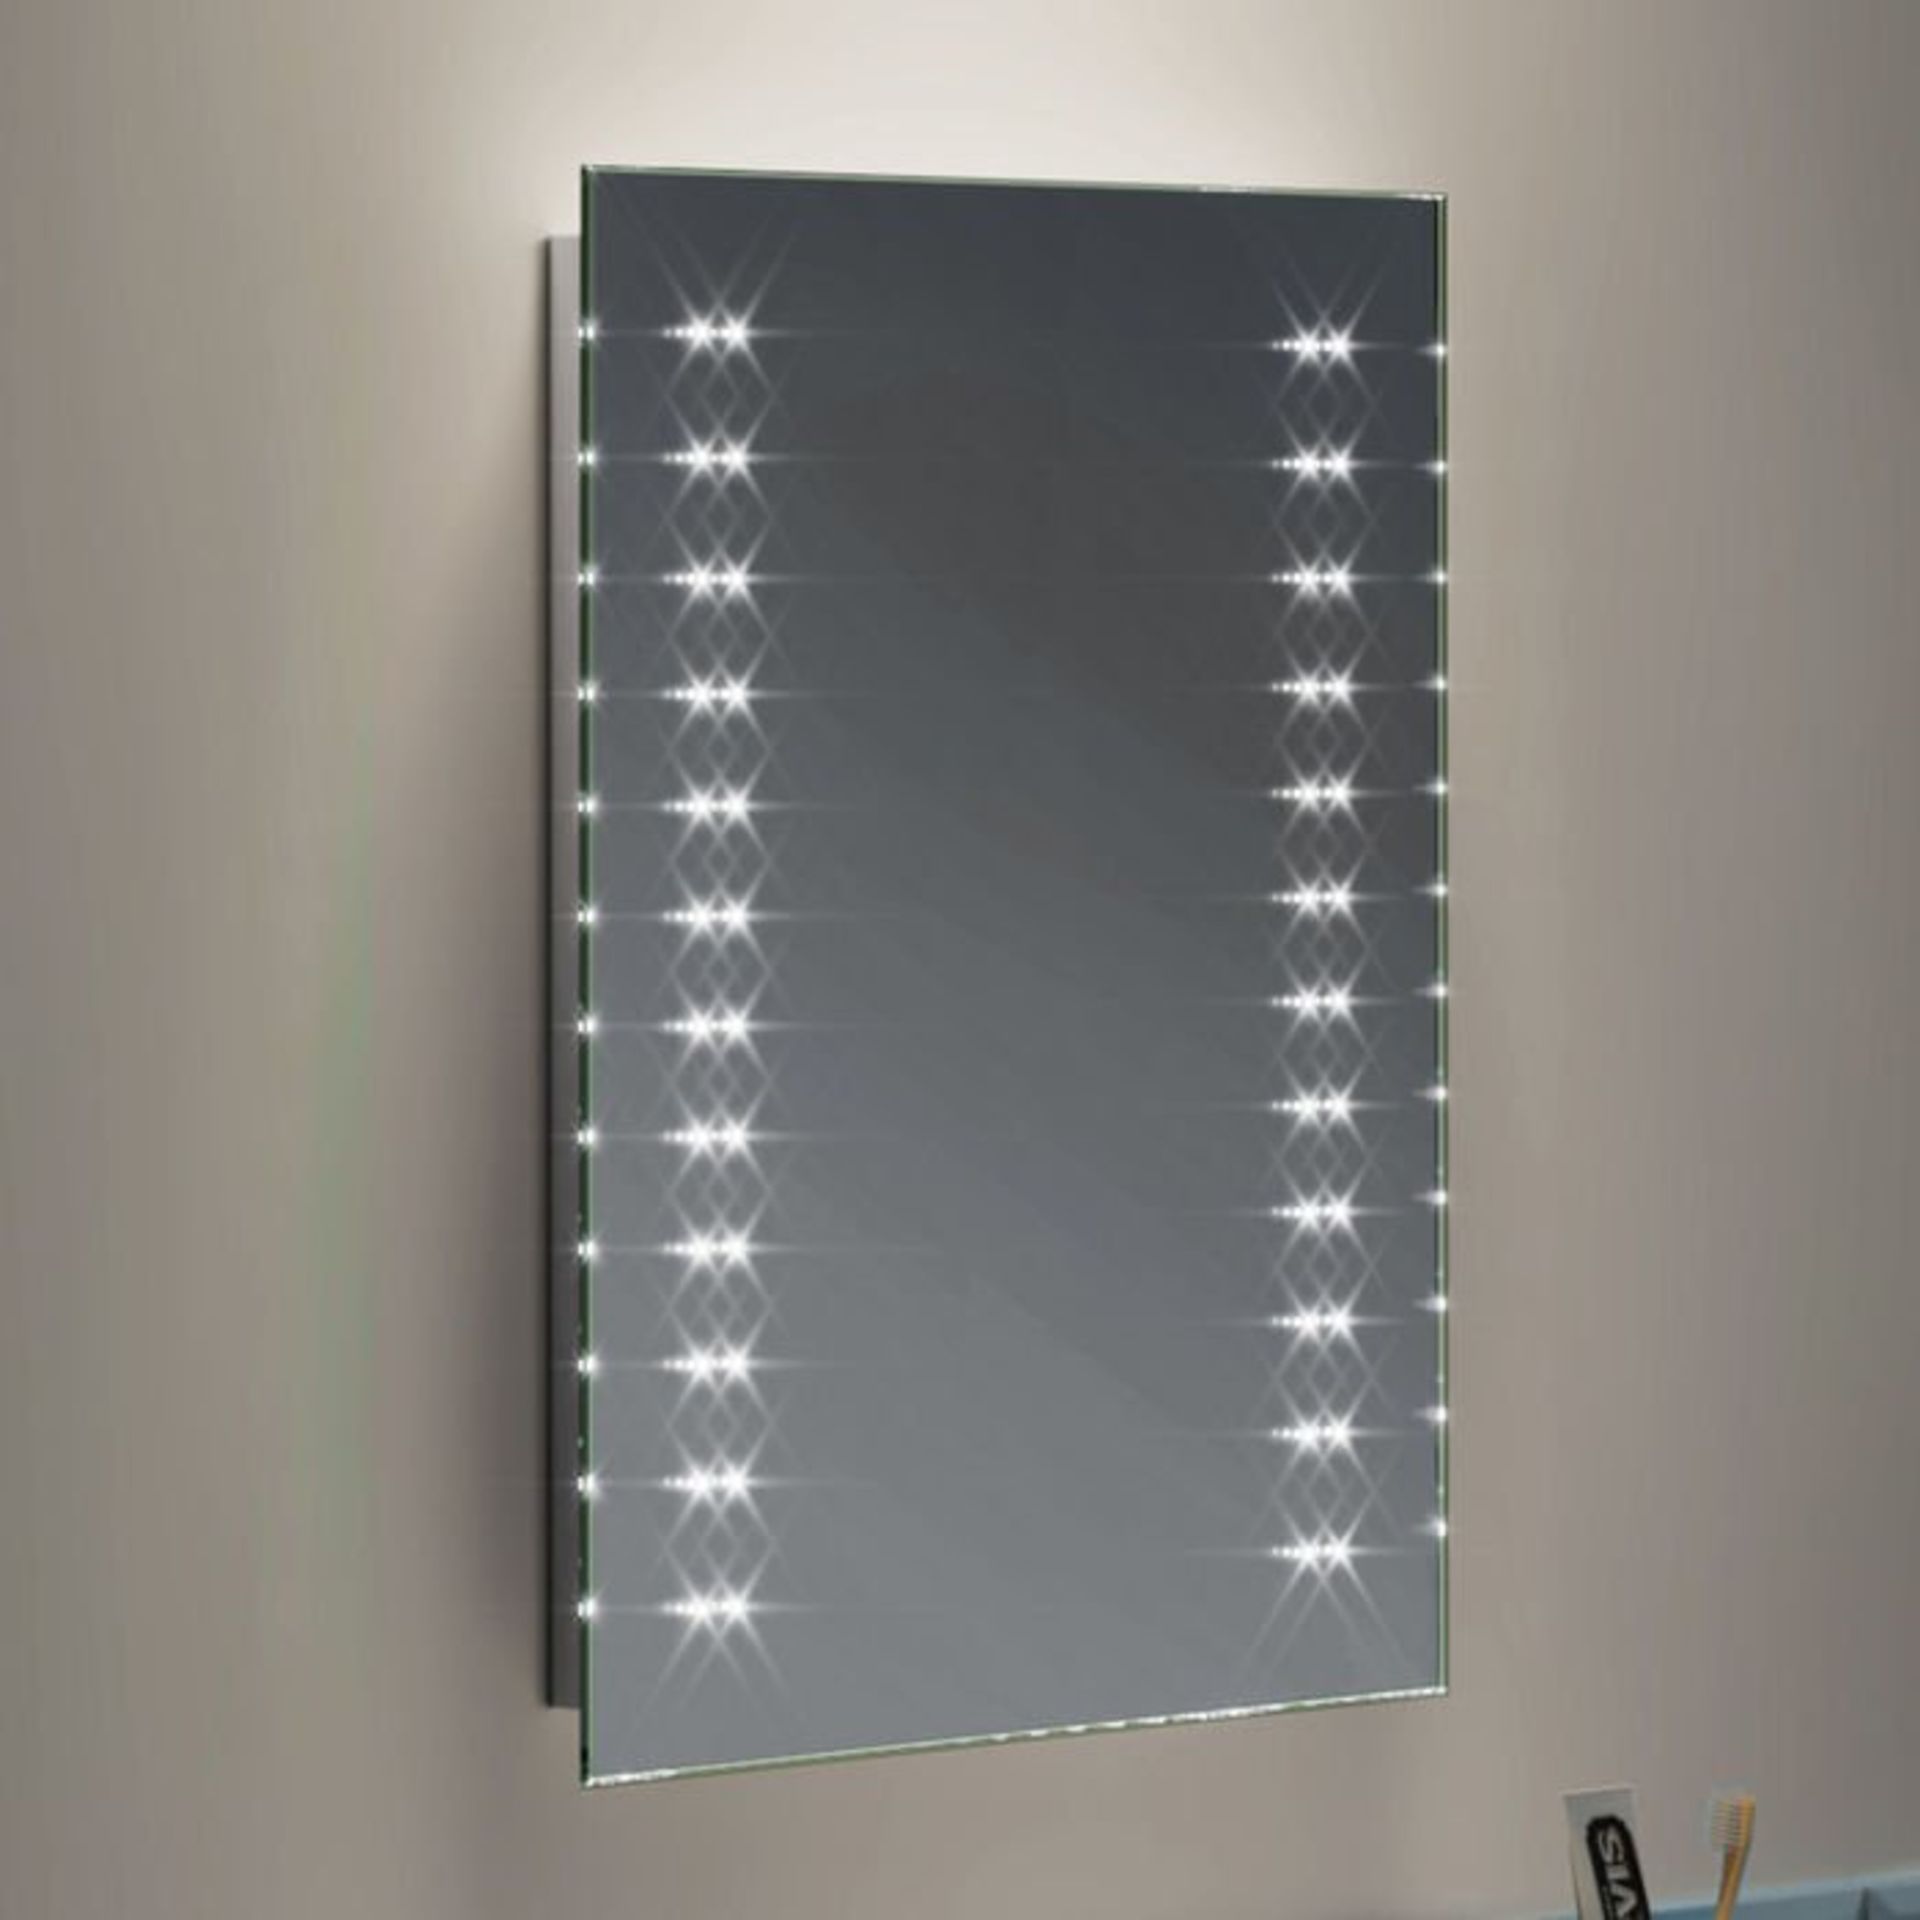 (K59) 390x500mm Galactic LED Mirror - Battery Operated. Energy saving controlled On / Off switch